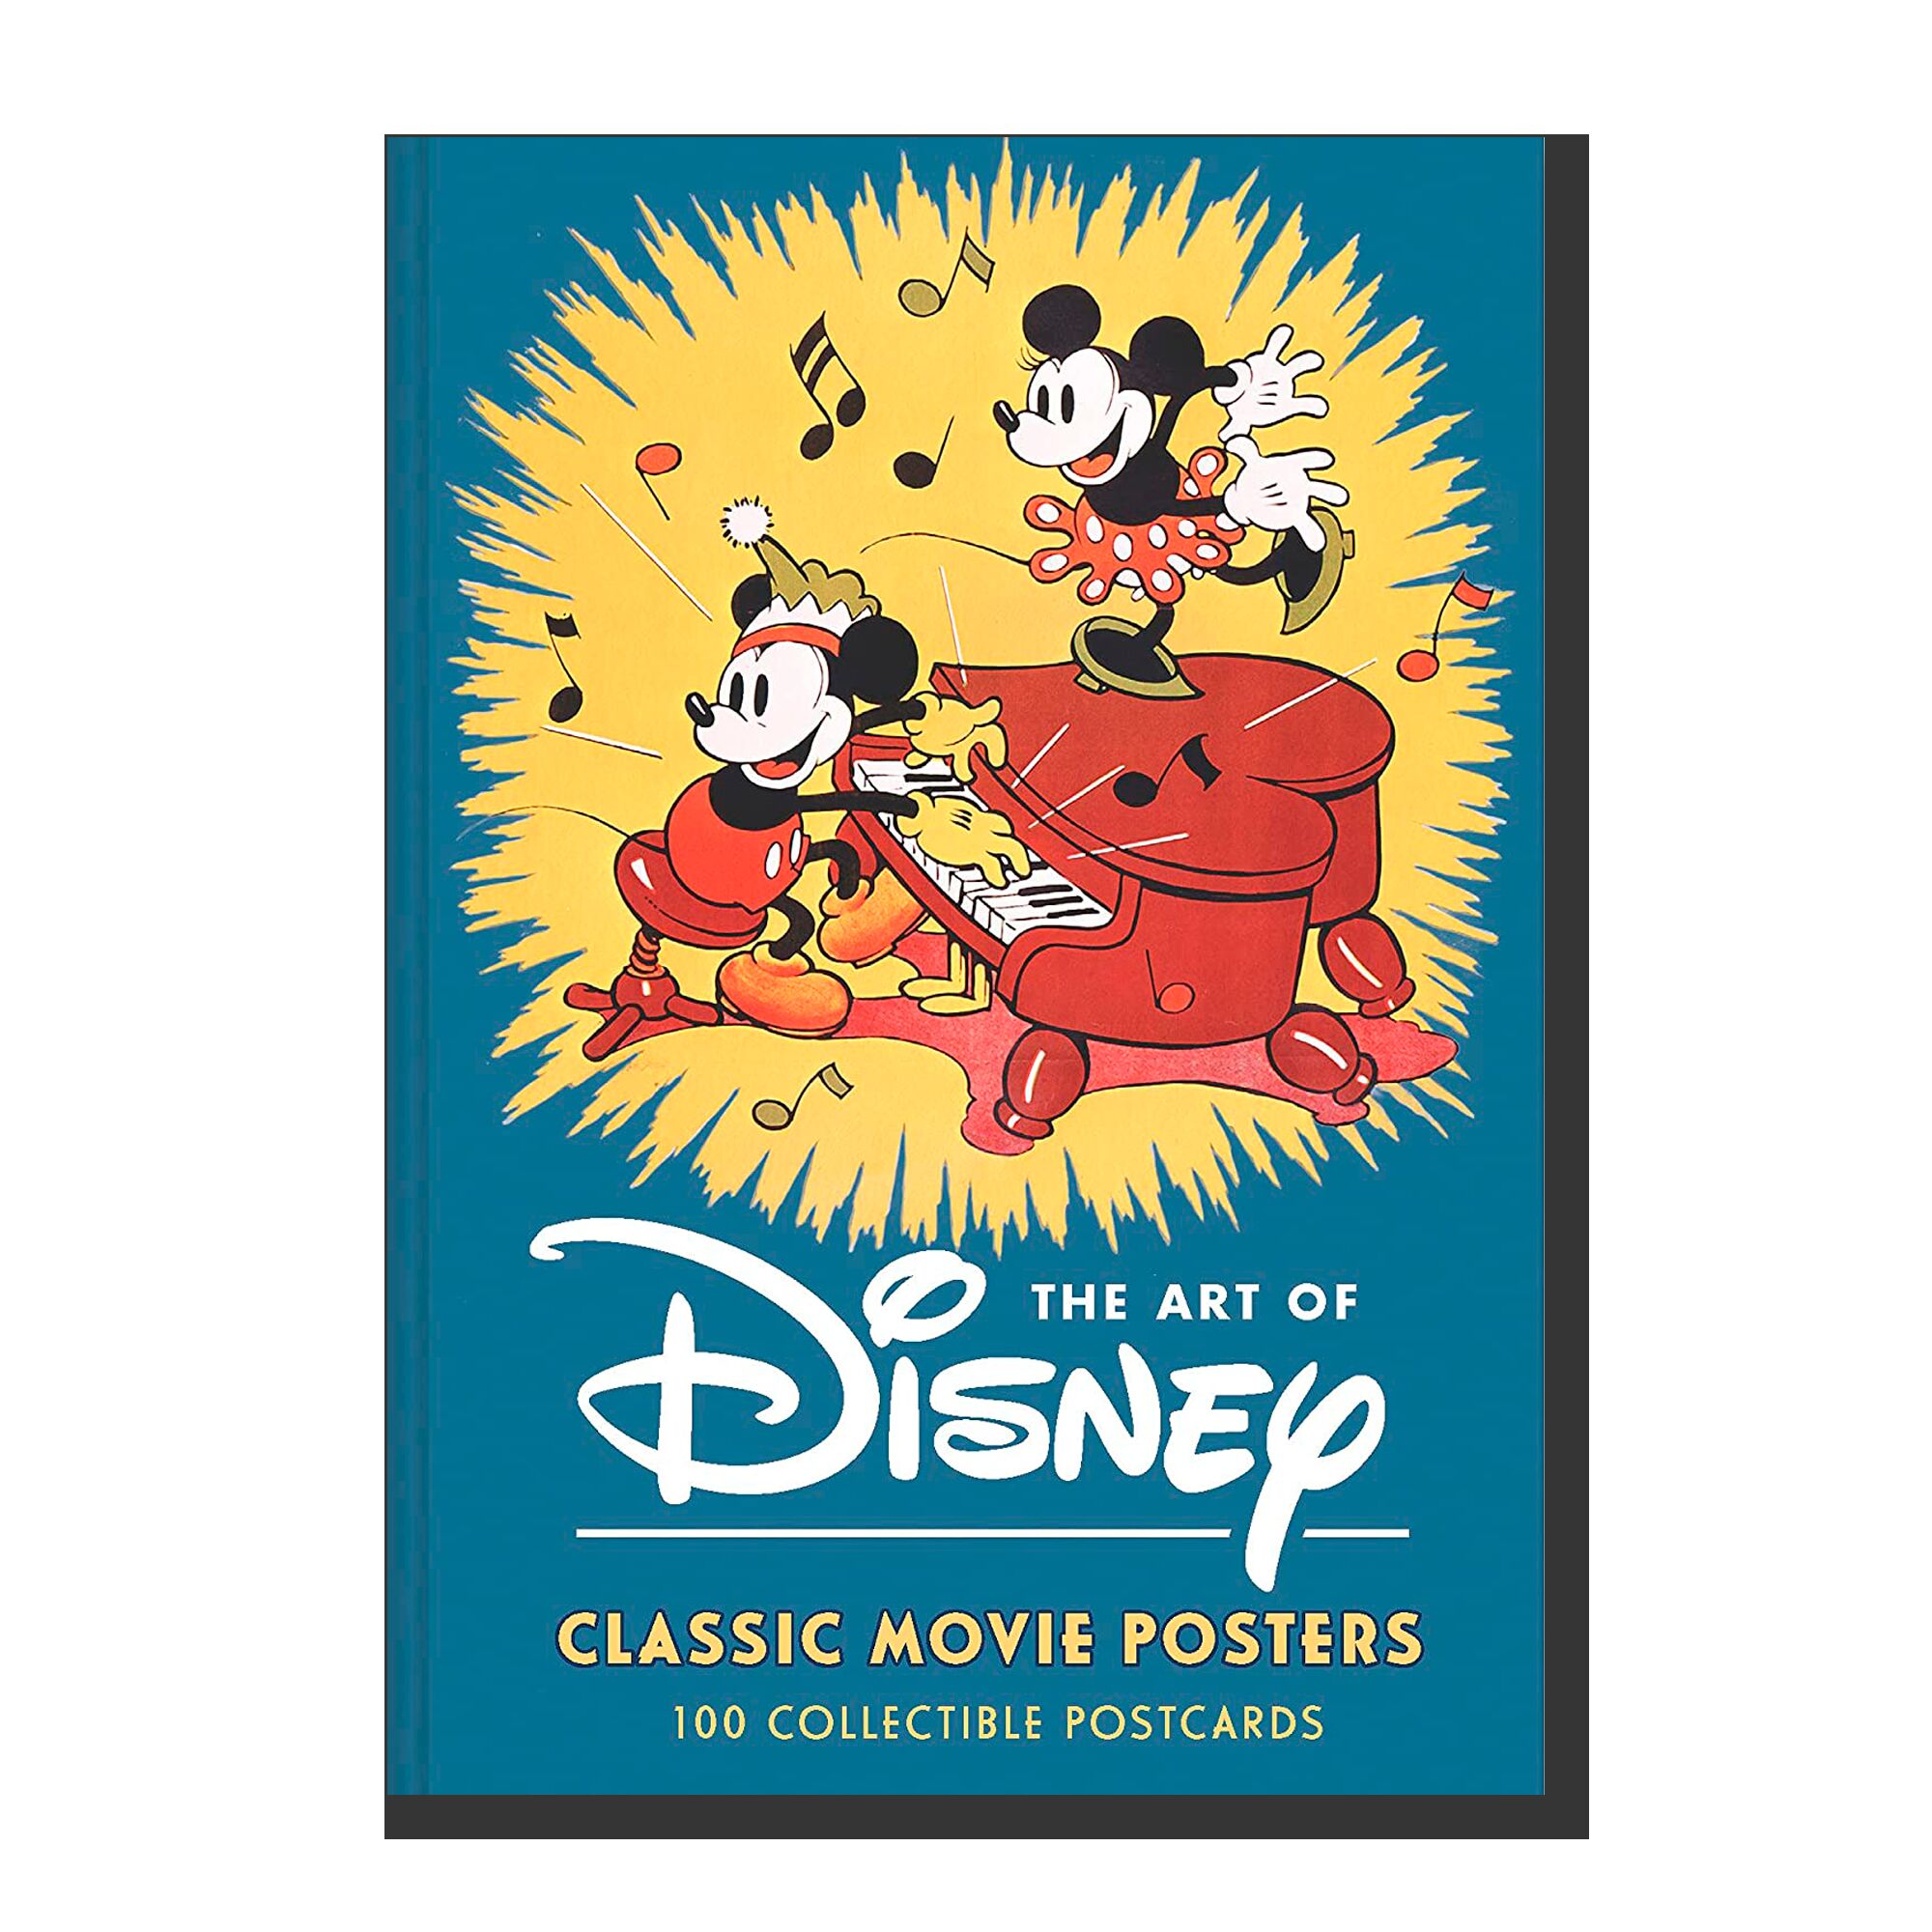 The Art of Disney: Classic Movie Posters. 100 Collectible Postcards